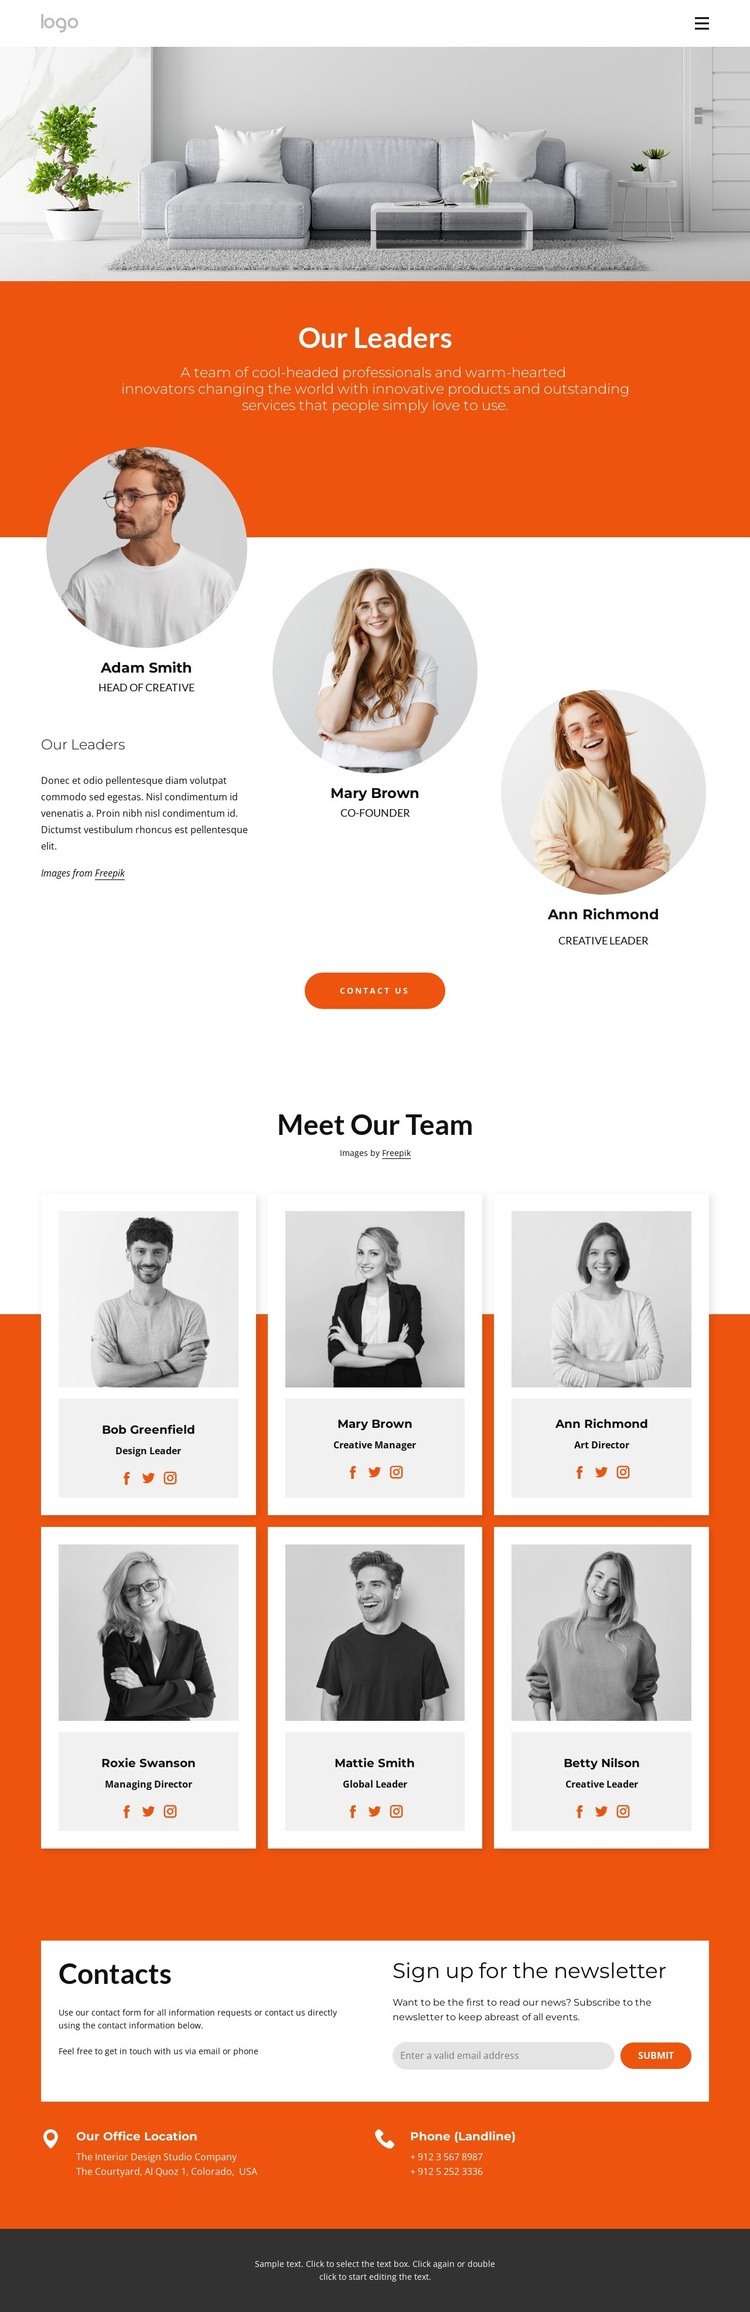 Our great team Homepage Design